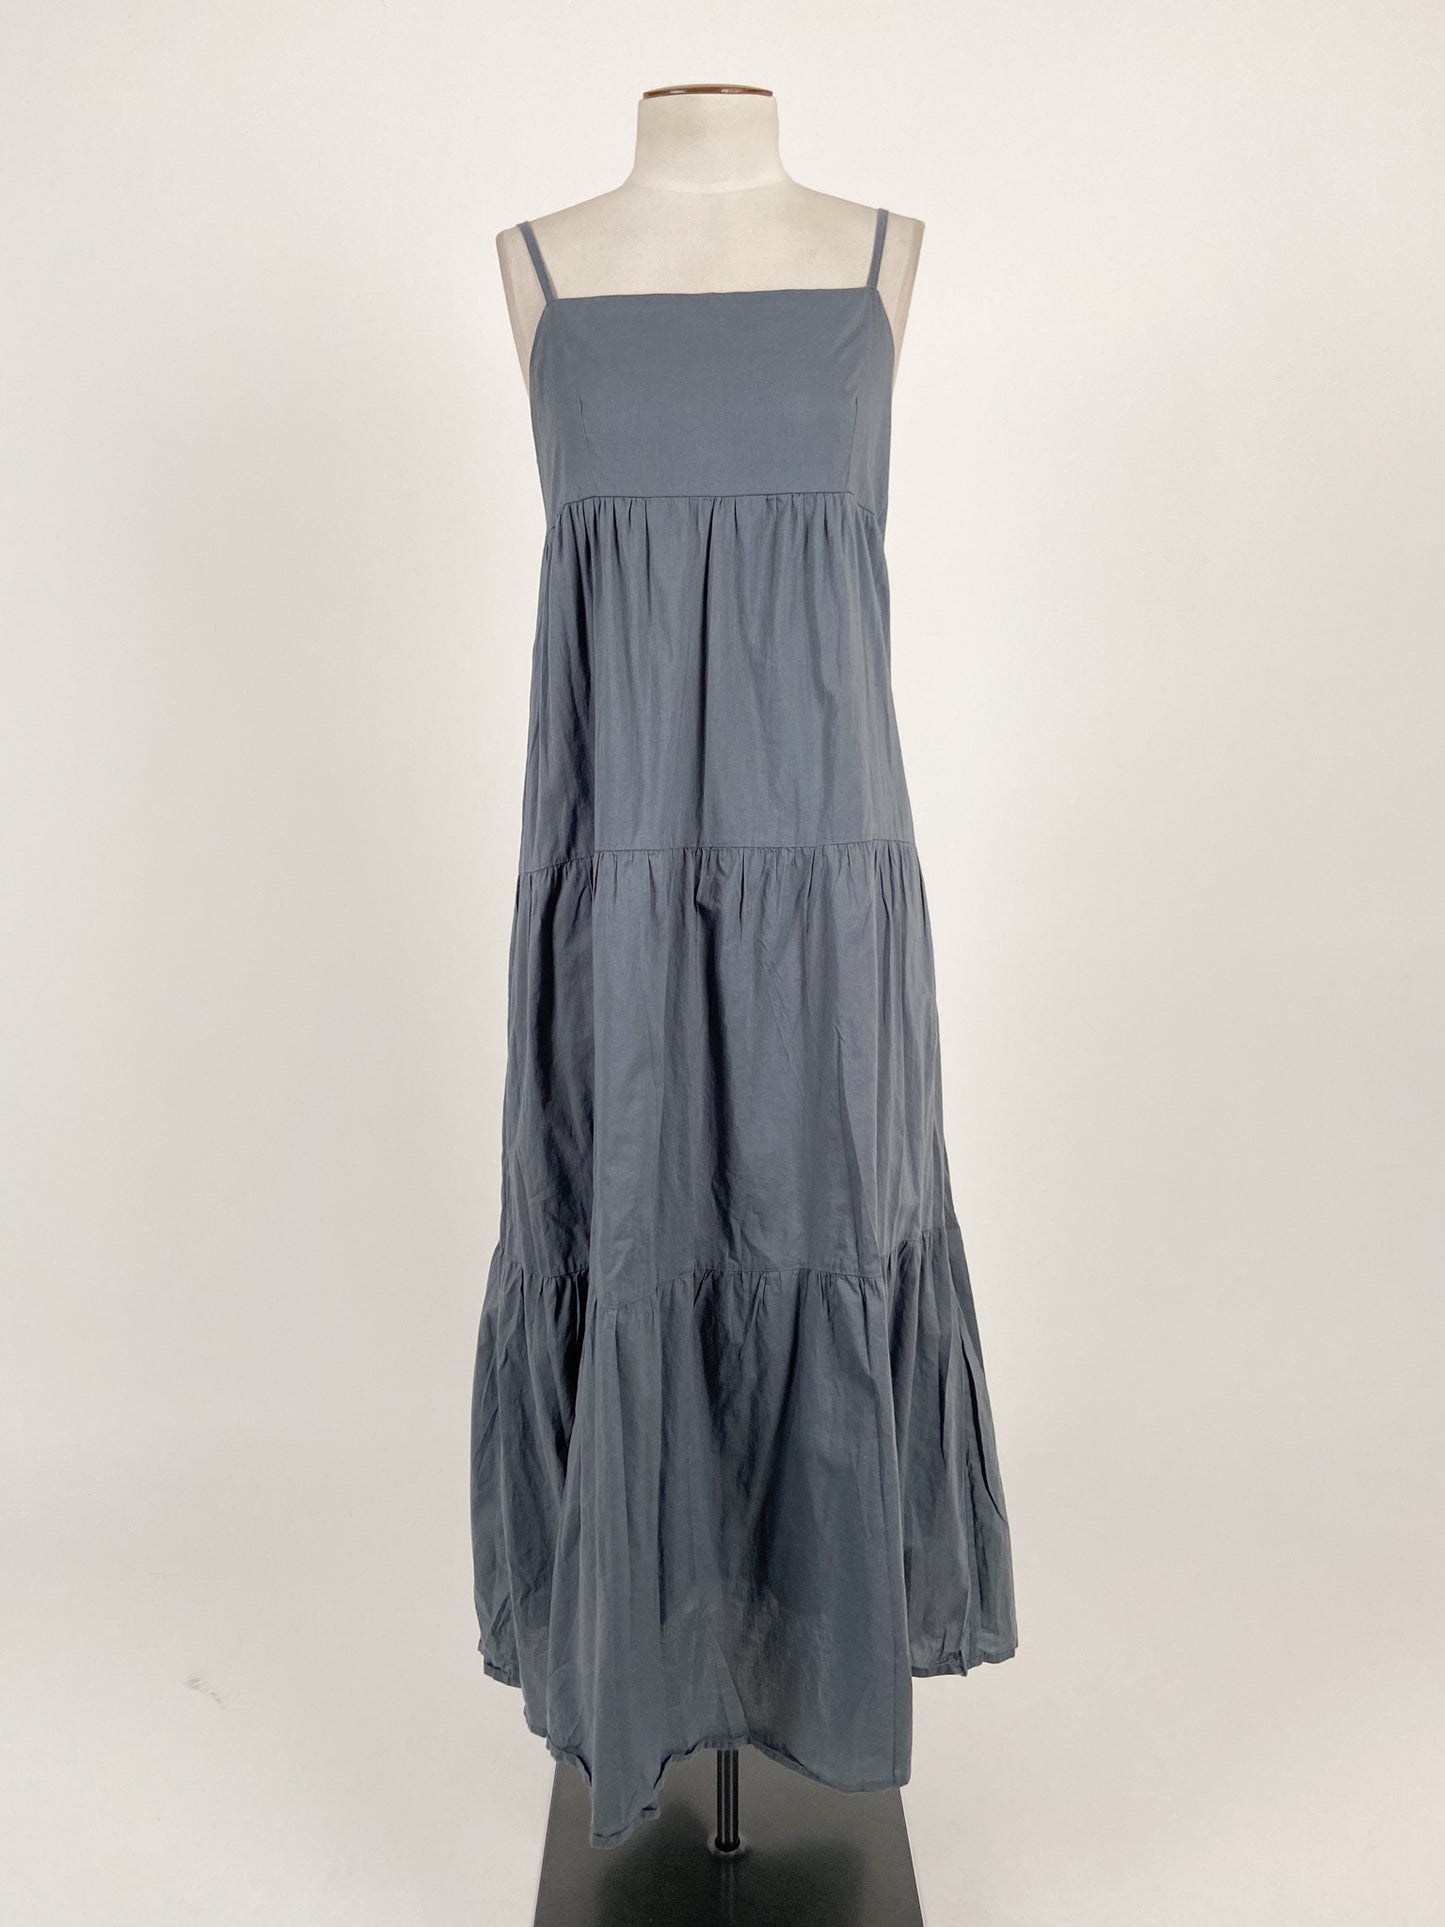 Glassons | Grey Casual Dress | Size 10